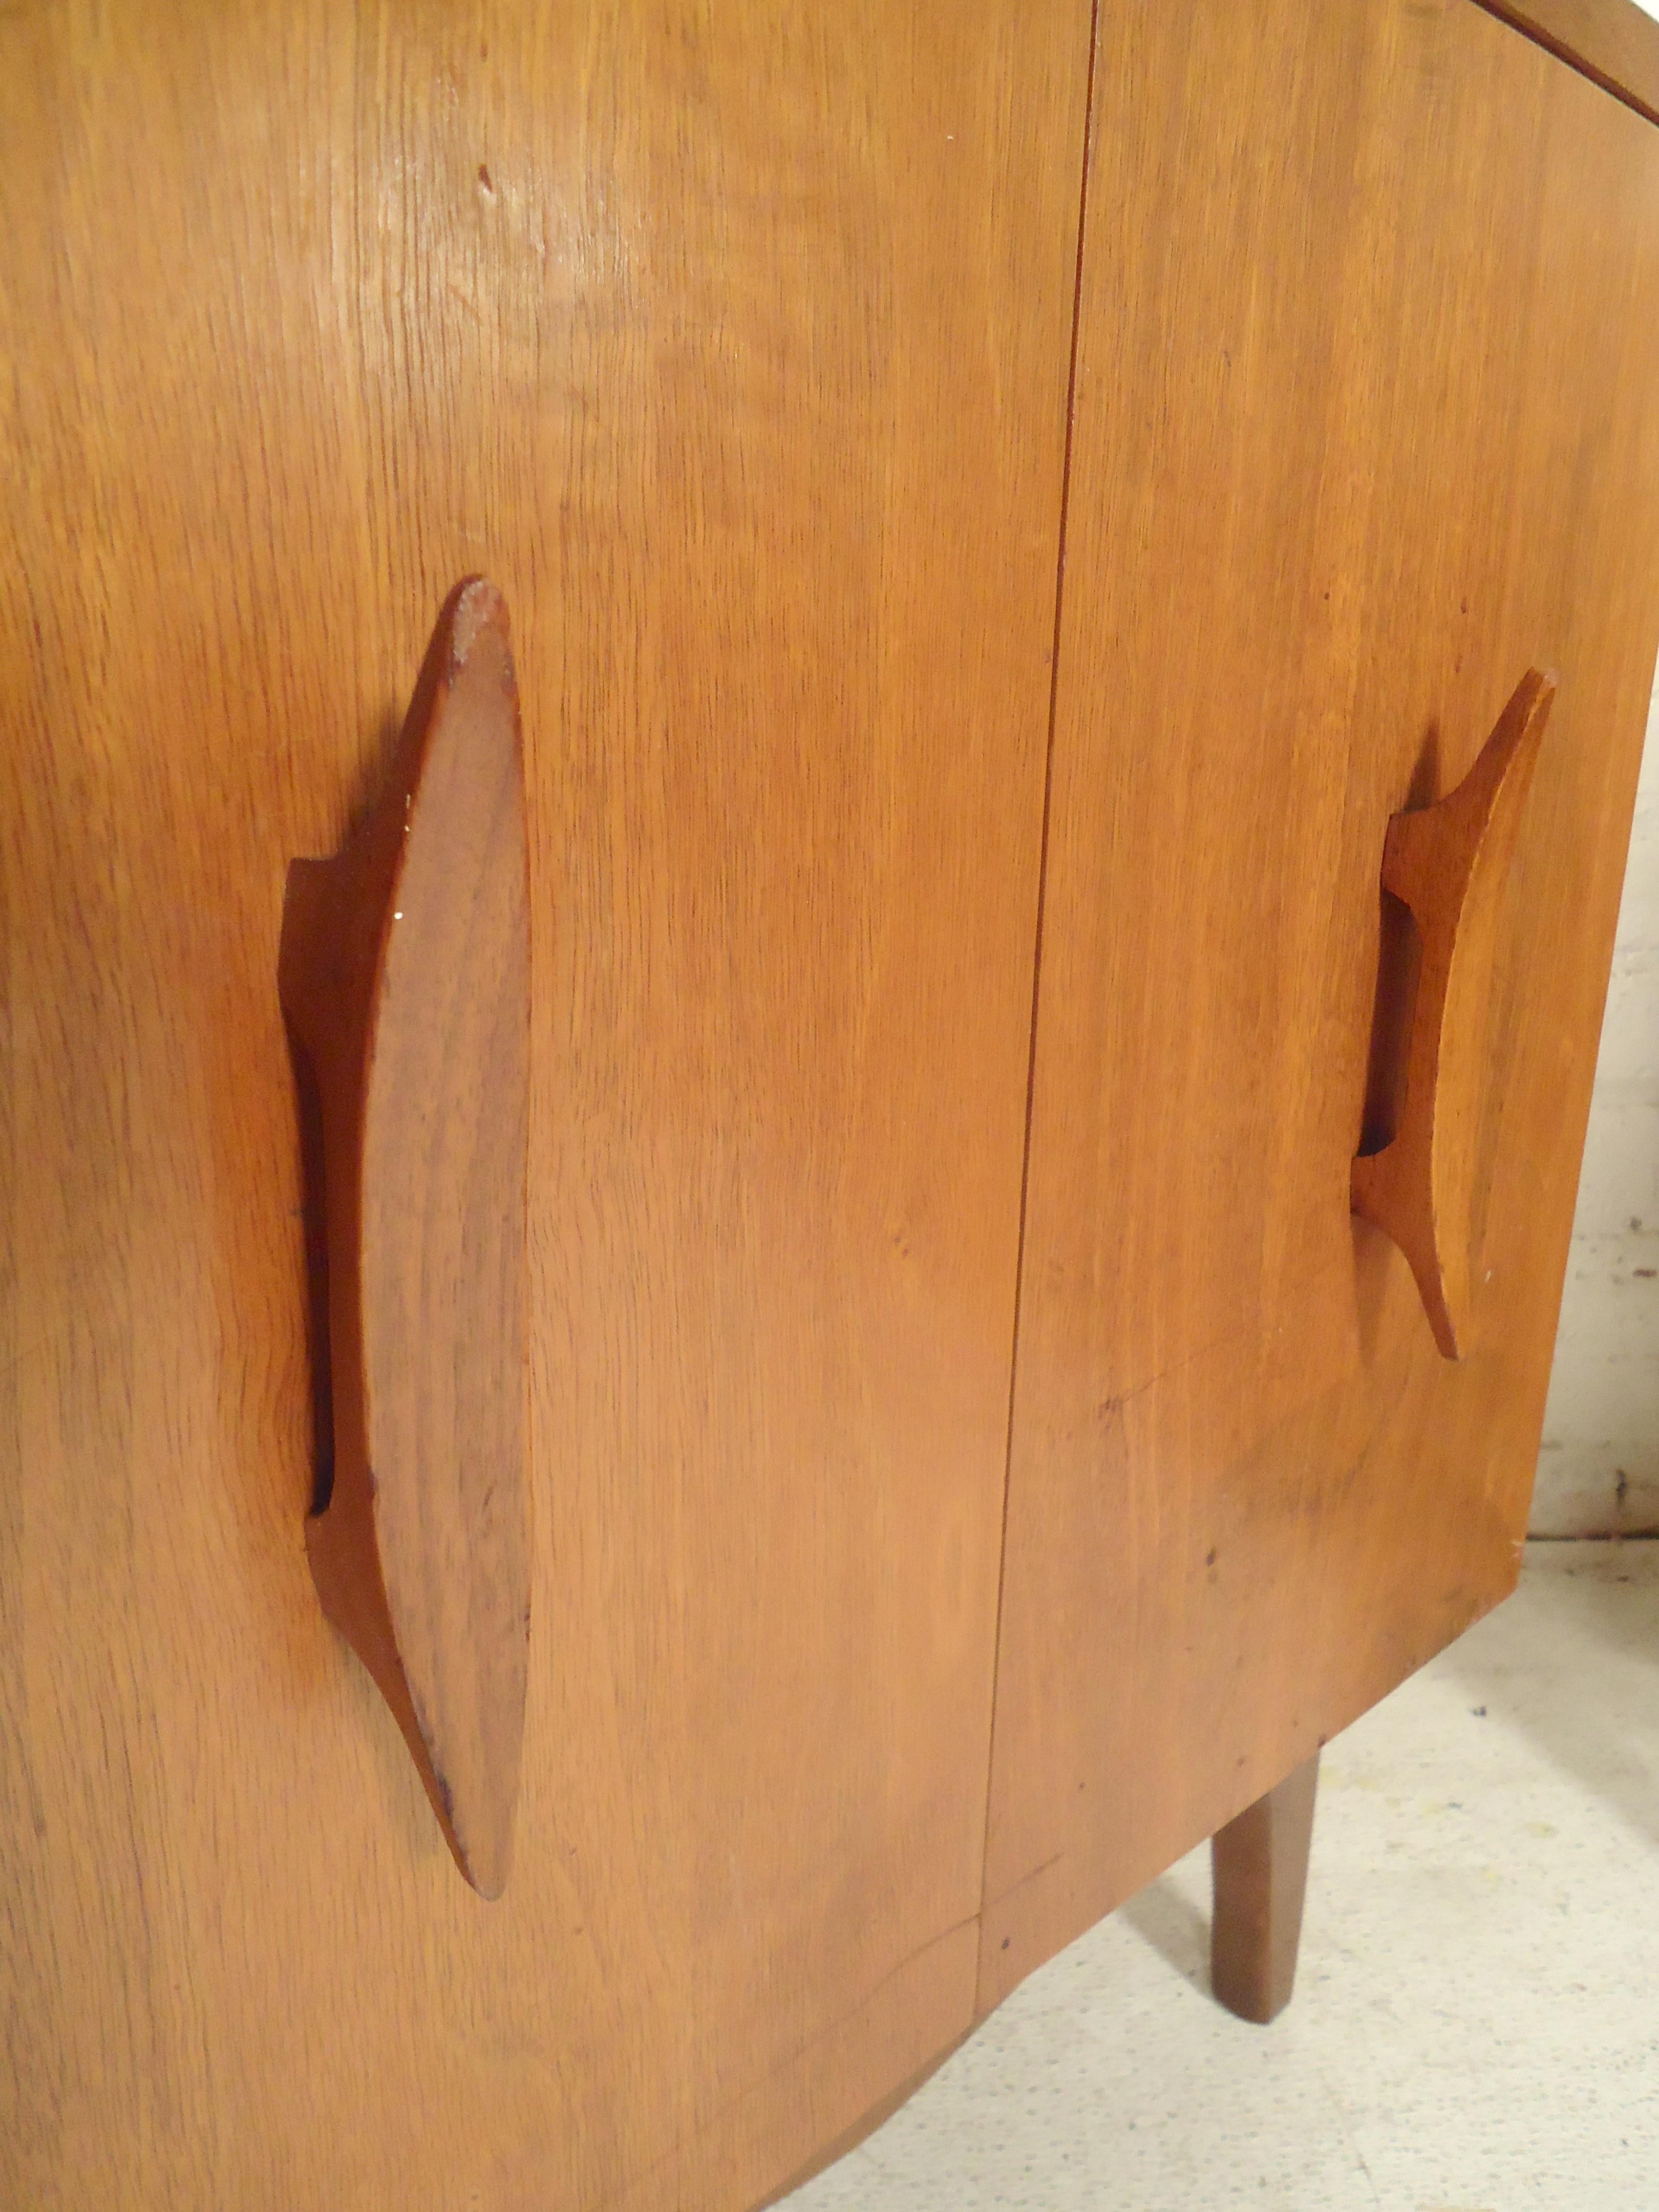 Vintage walnut side cabinets with unique sculpted handles and legs. Holes inside the cabinet for adjustable shelving.

(Please confirm item location - NY or NJ - with dealer).
 